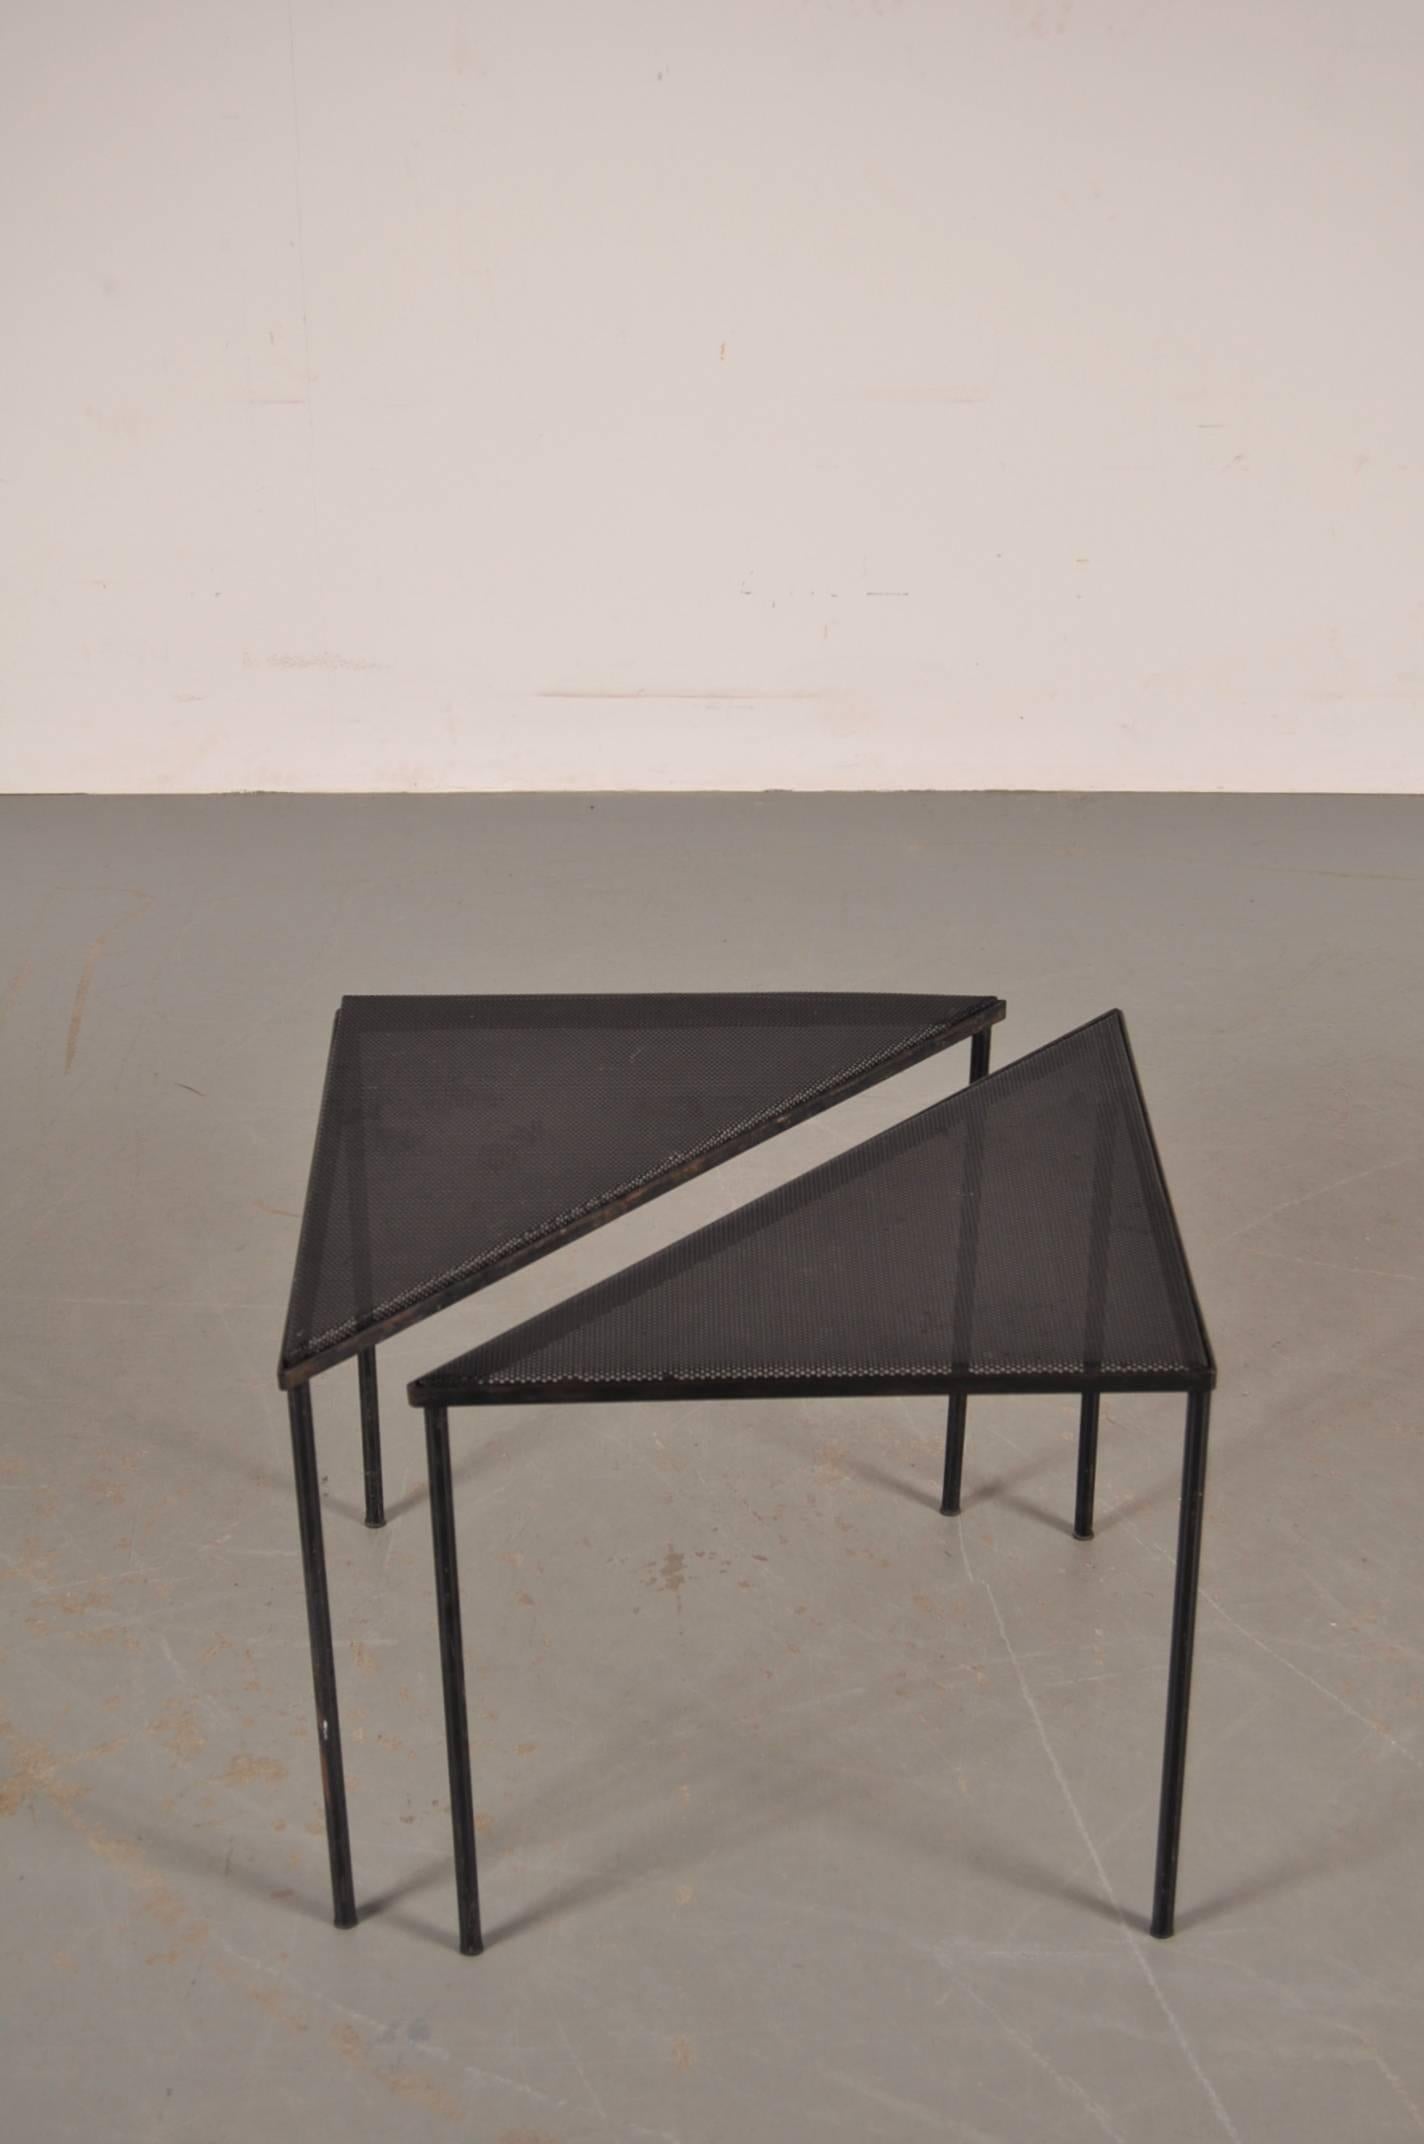 Stunning pair of side tables designed by Mathieu Matégot, manufactured by Artimeto in Soest, the Netherlands, circa 1950.

These eyecatching tables are made of high quality black metal with perforated tops, making them highly recognizable